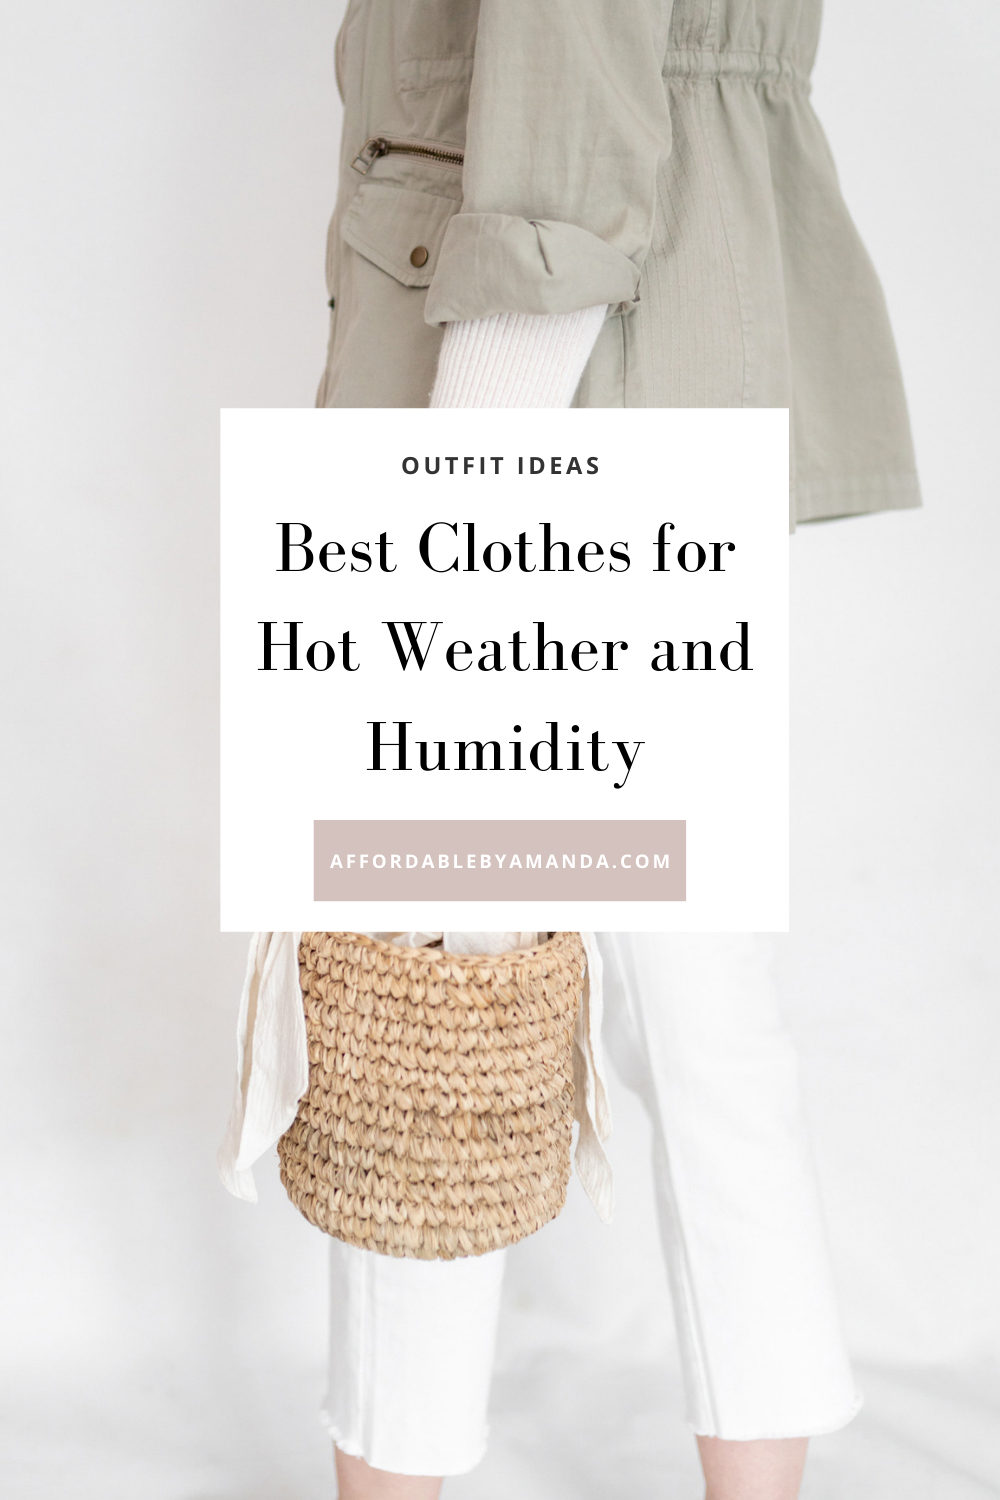 Best Clothes for Hot Weather and Humidity - Affordable by Amanda, TOP US STYLE BLOG